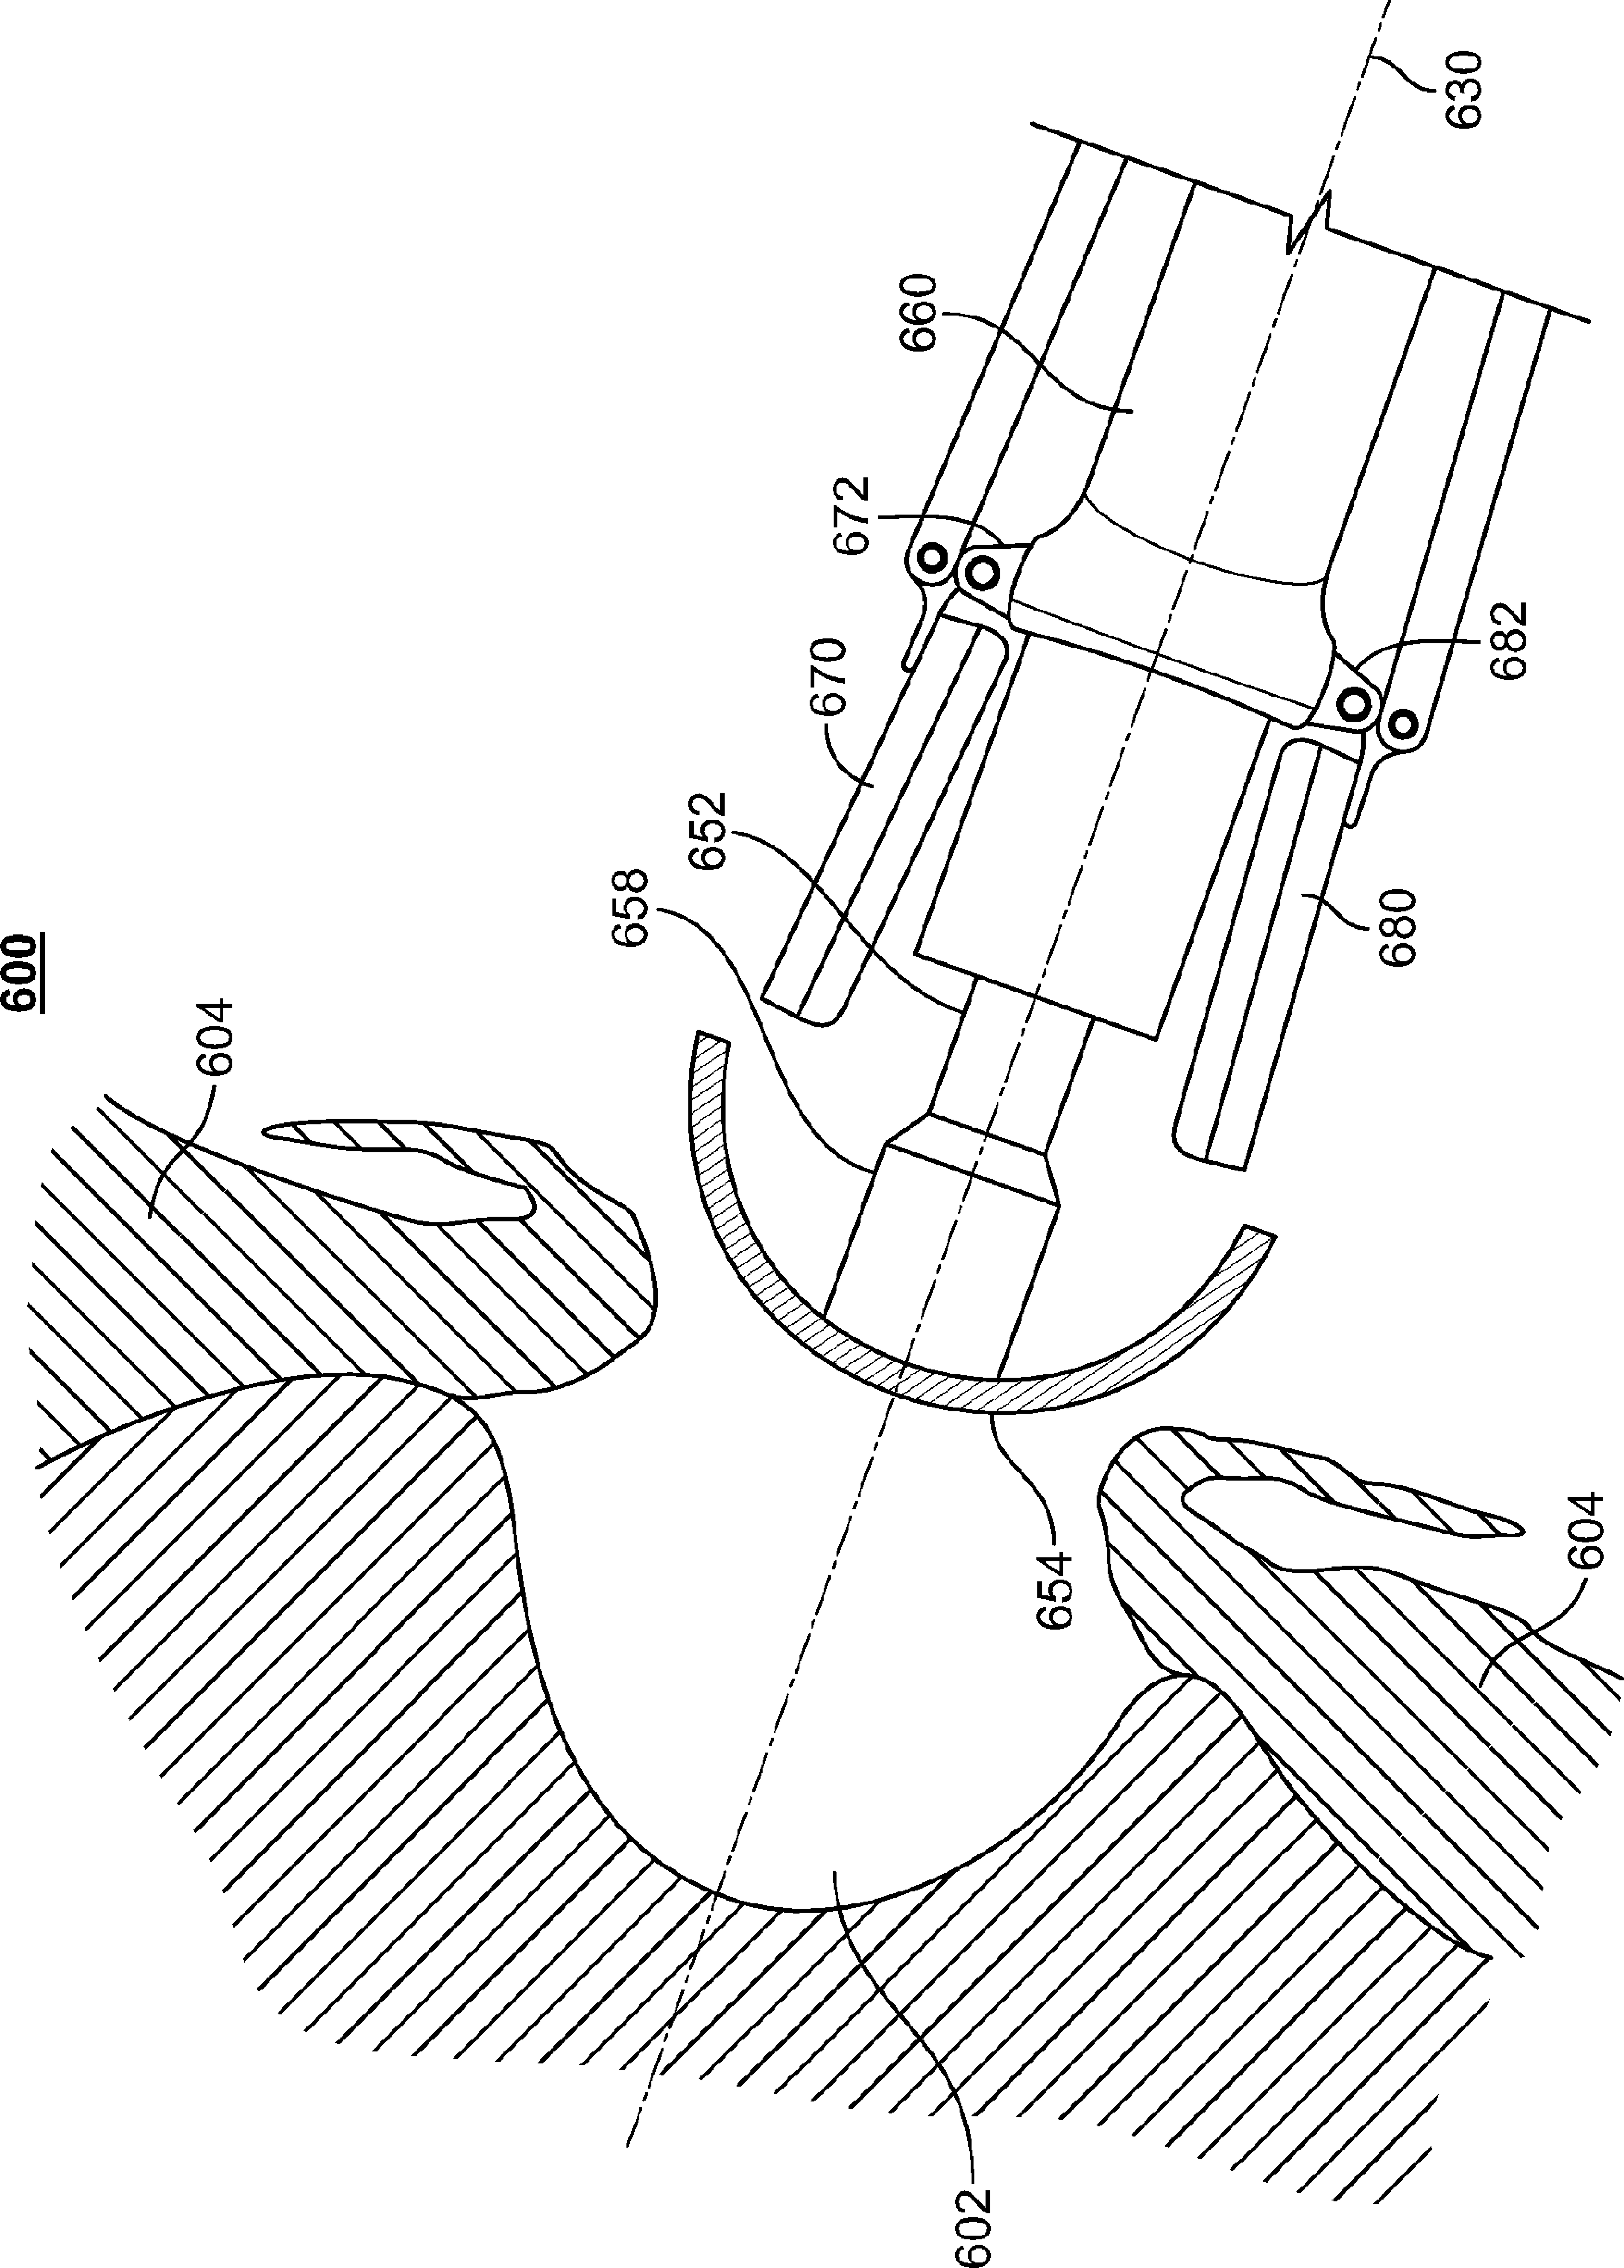 Patient-matched acetabular alignment tool